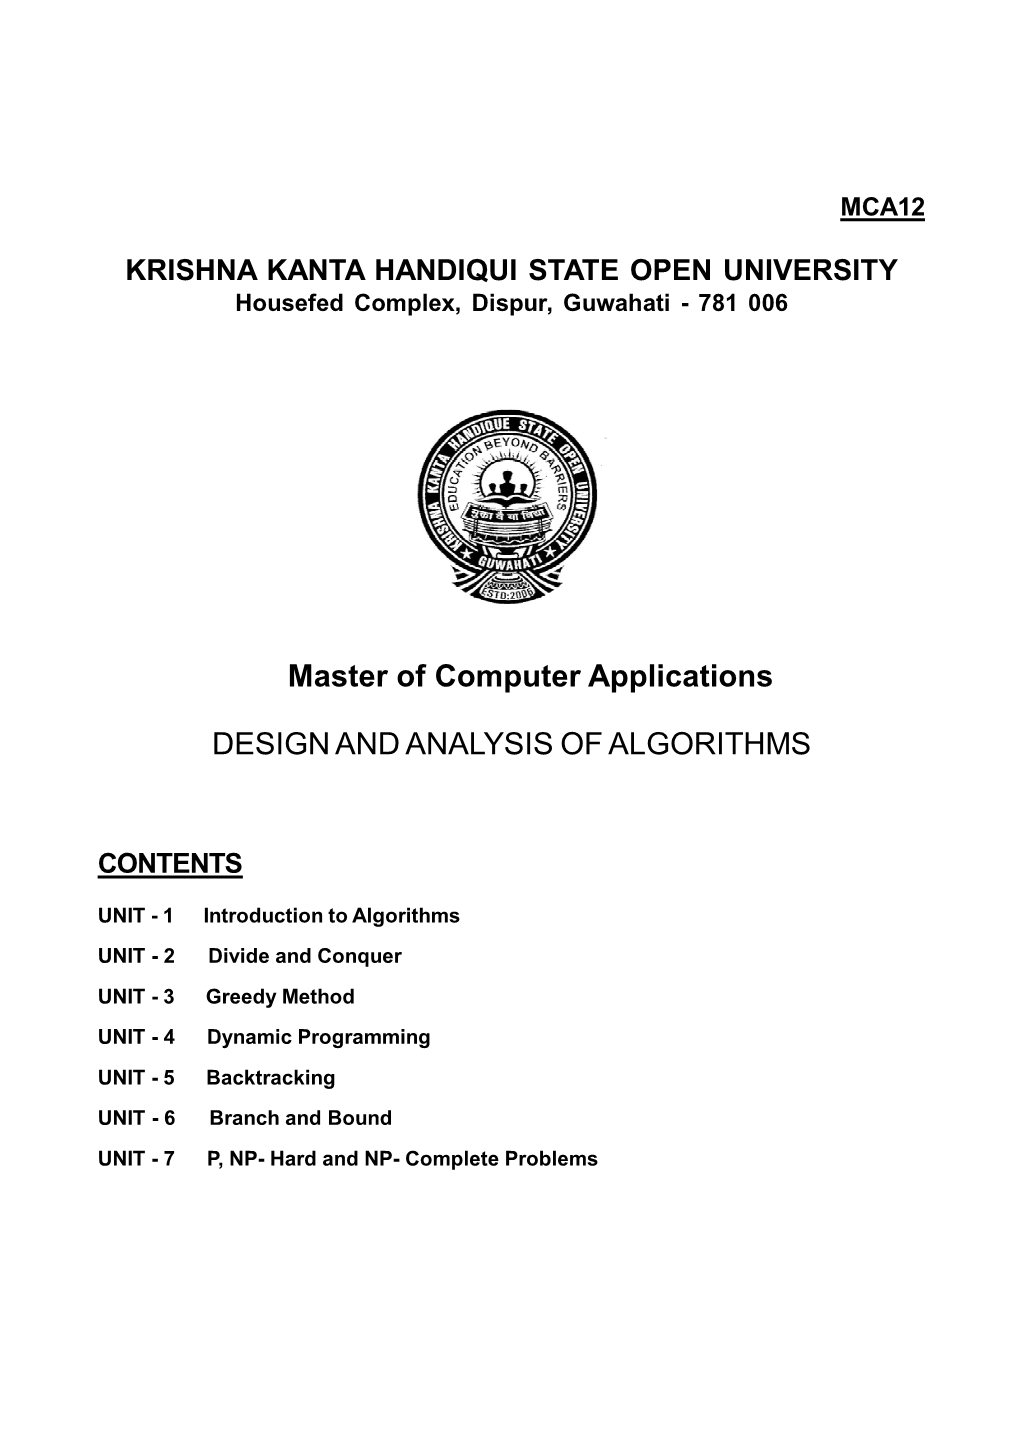 Master of Computer Applications DESIGN and ANALYSIS of ALGORITHMS